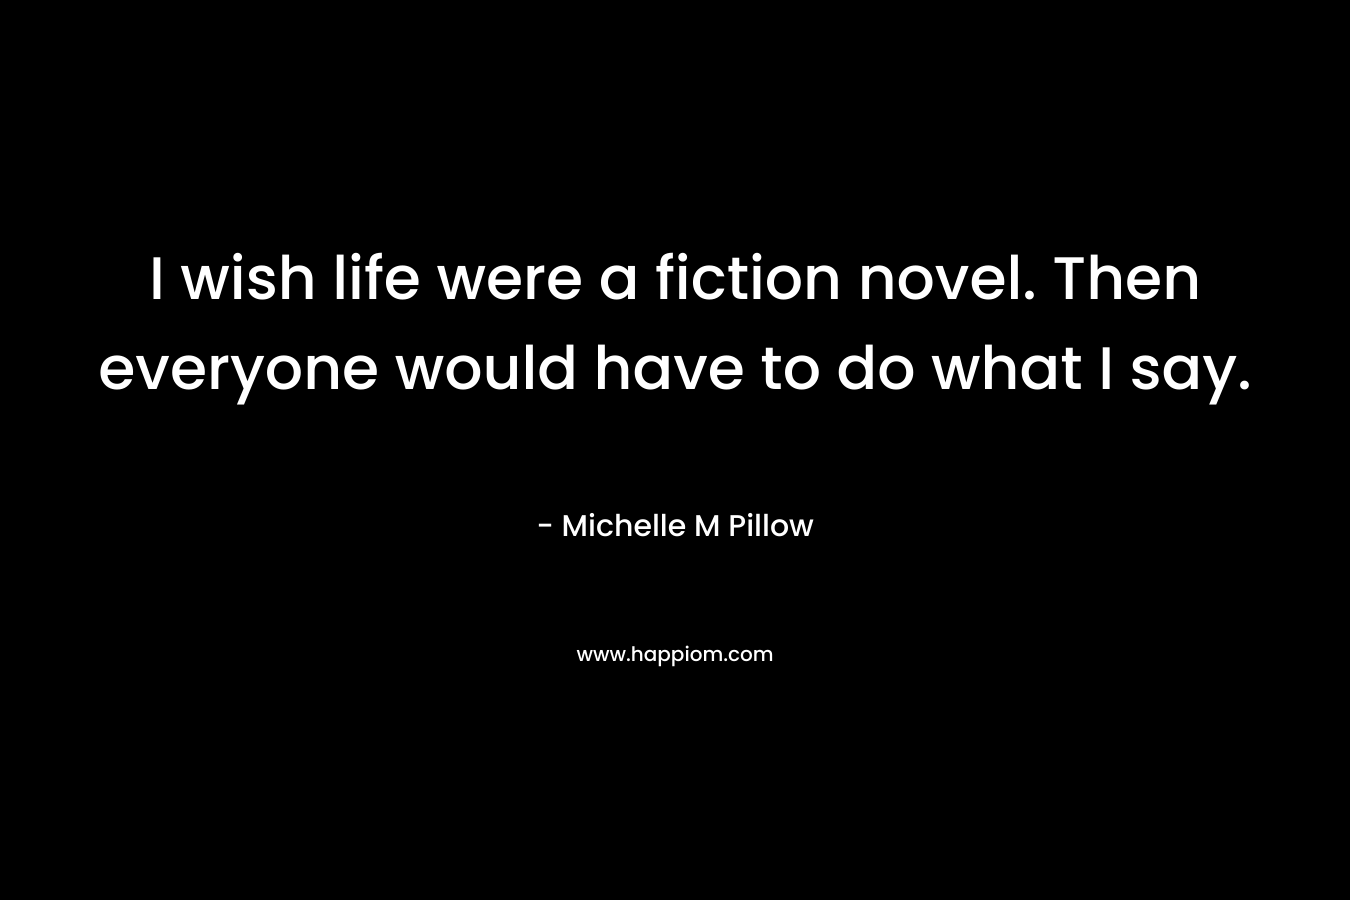 I wish life were a fiction novel. Then everyone would have to do what I say.